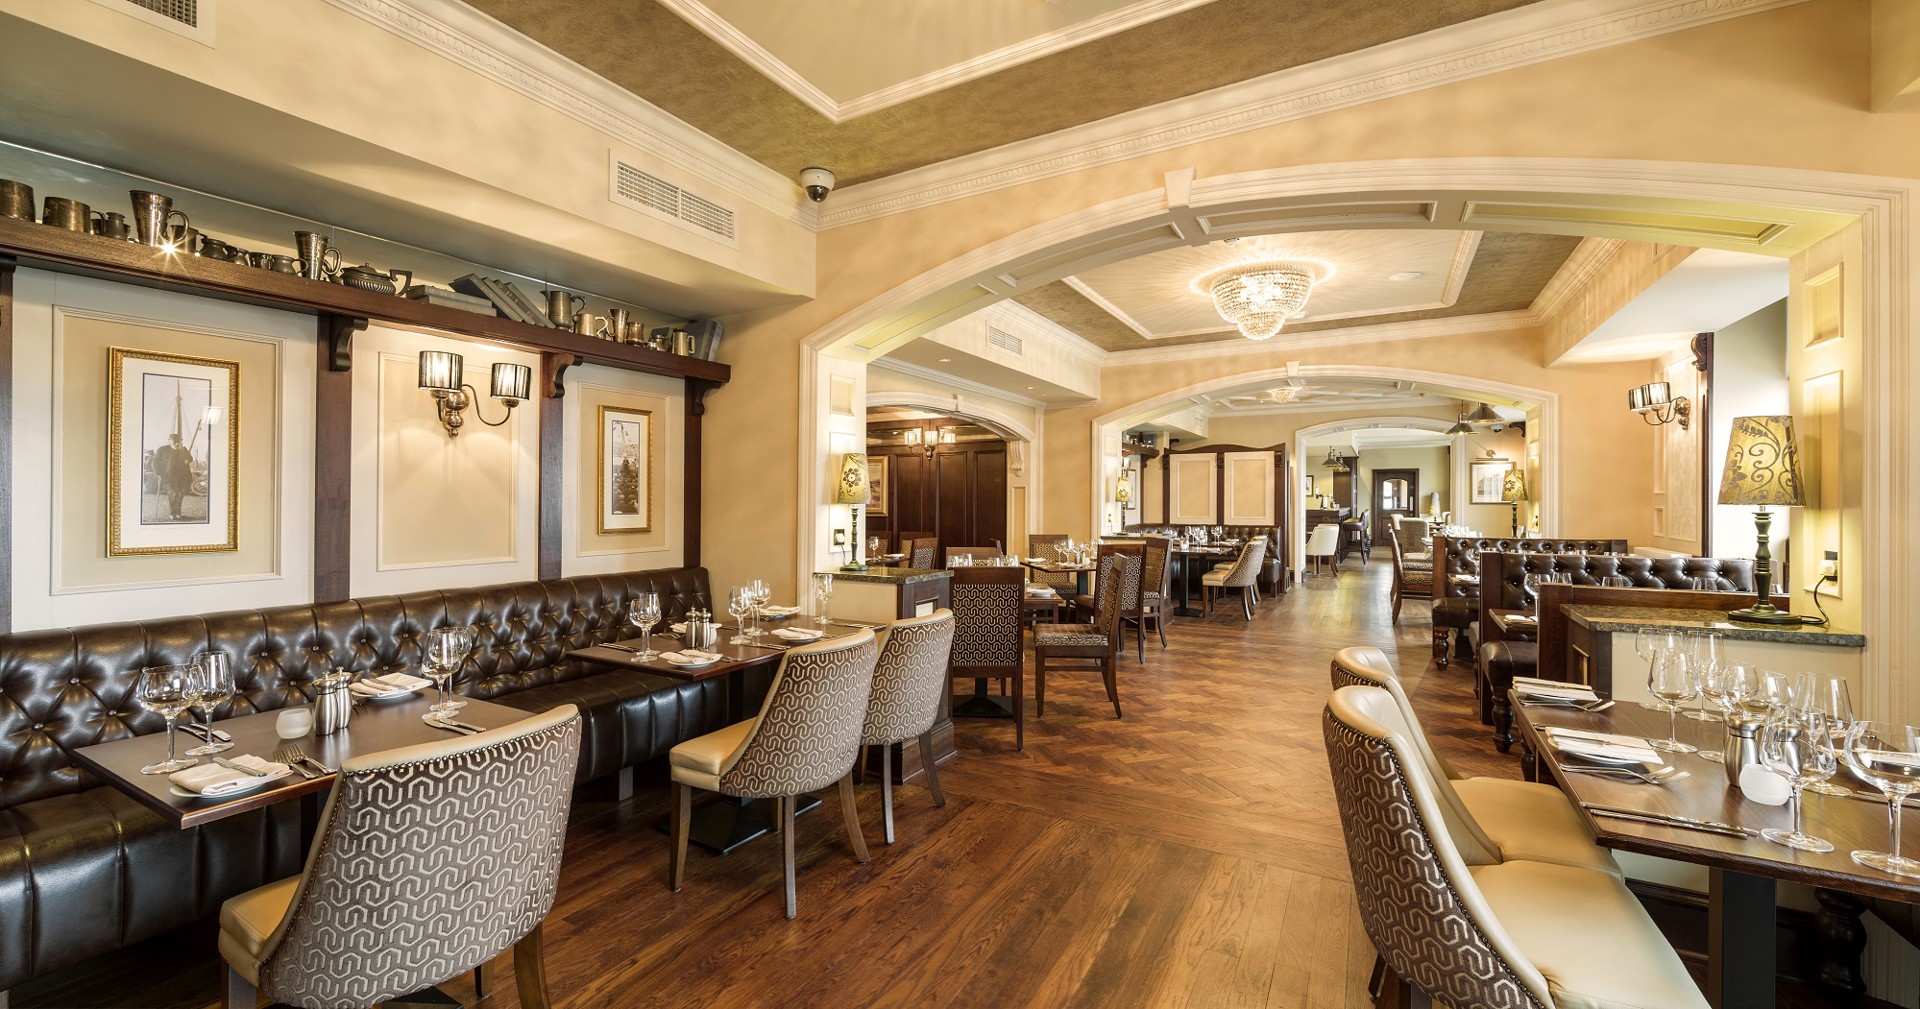 Background image - Harbourview Grille Dining Room